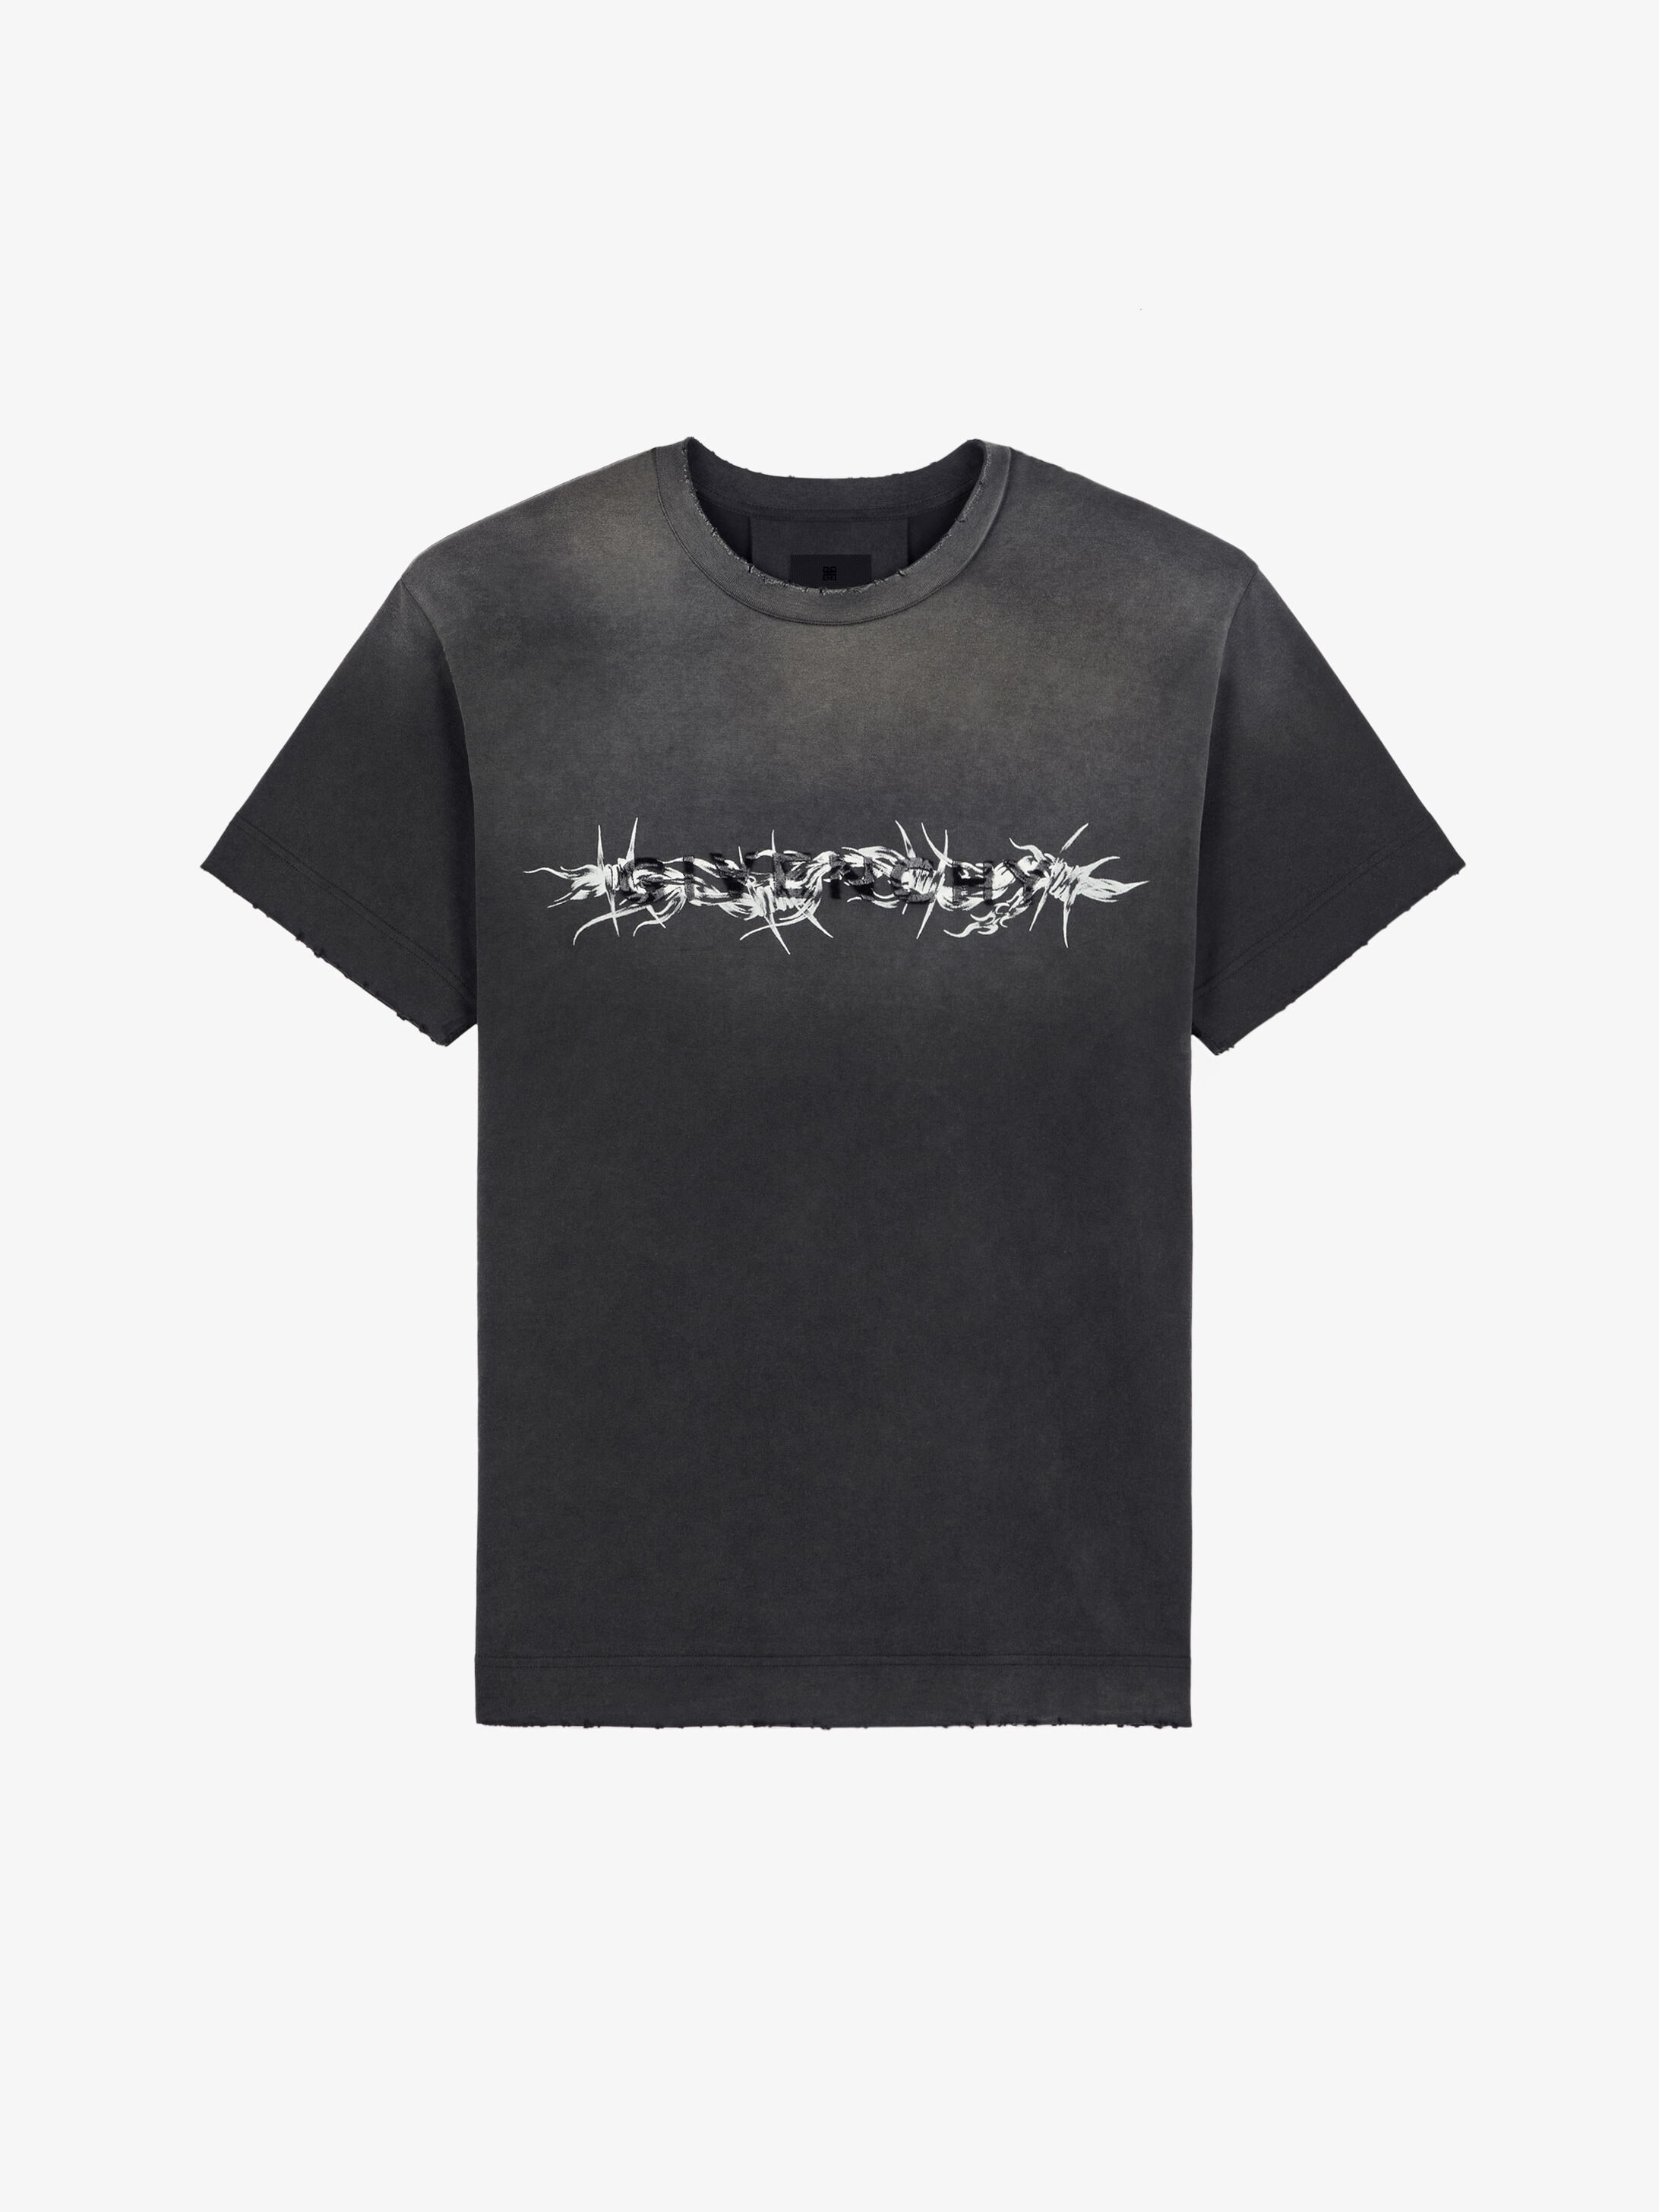 GIVENCHY barbed wire vintage oversized t-shirt | GIVENCHY Paris